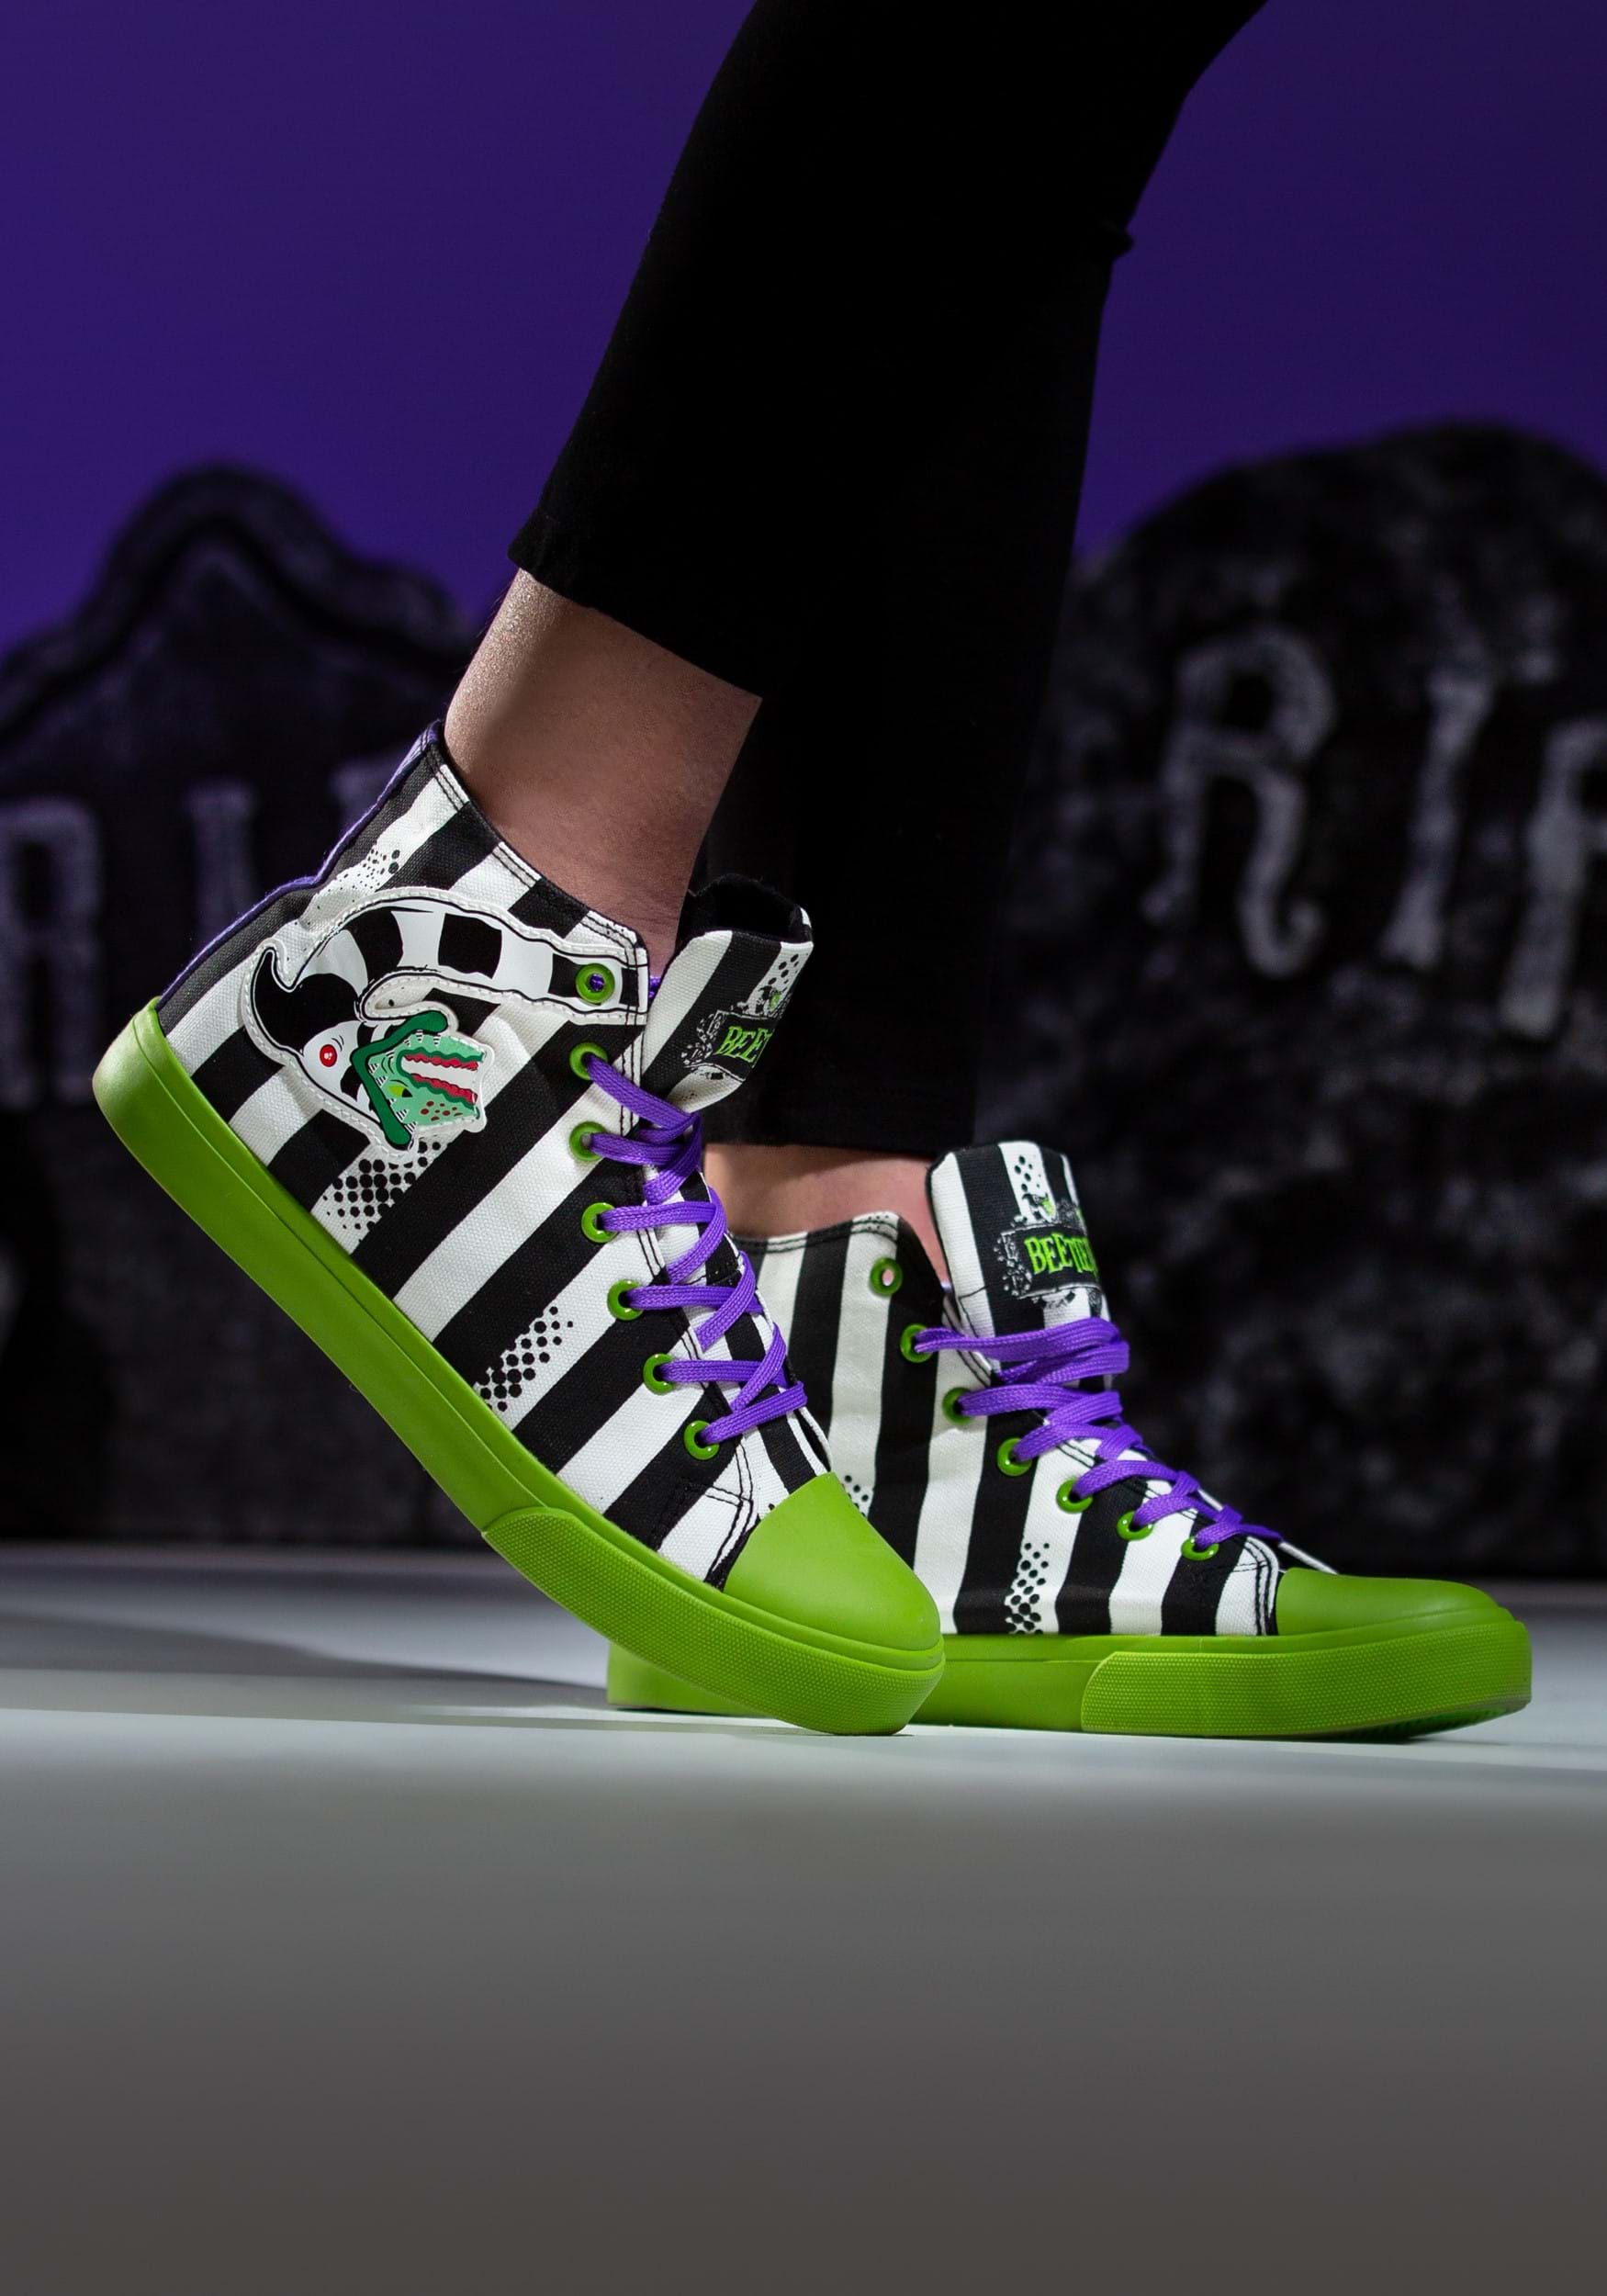 Unisex Beetlejuice Black and White Striped Sneakers - Mad Halloween